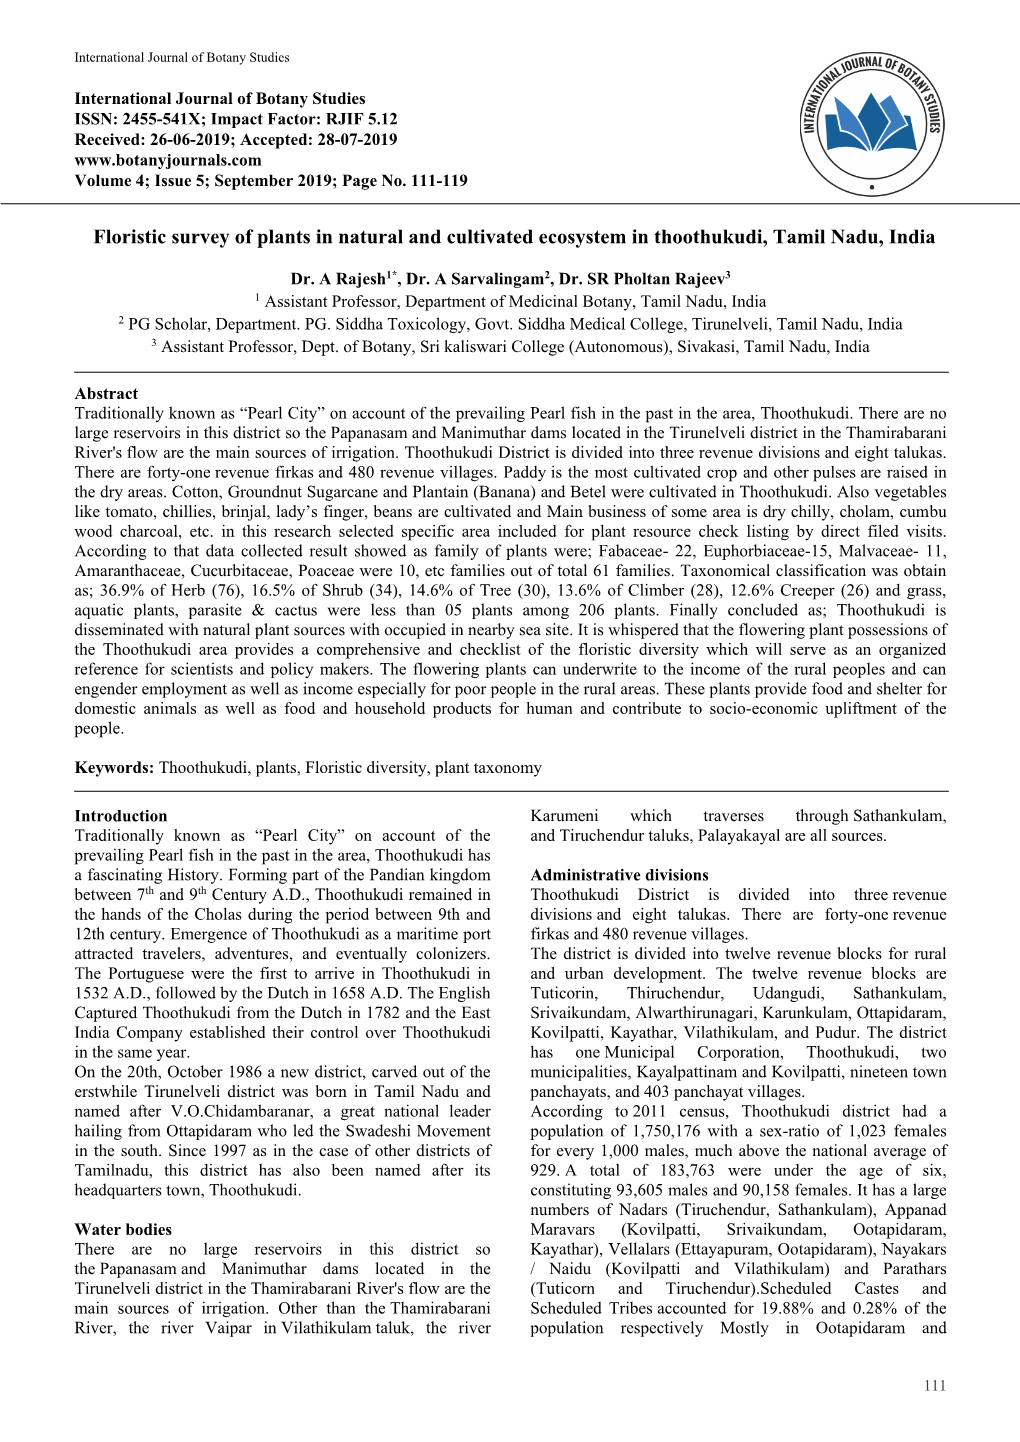 Floristic Survey of Plants in Natural and Cultivated Ecosystem in Thoothukudi, Tamil Nadu, India